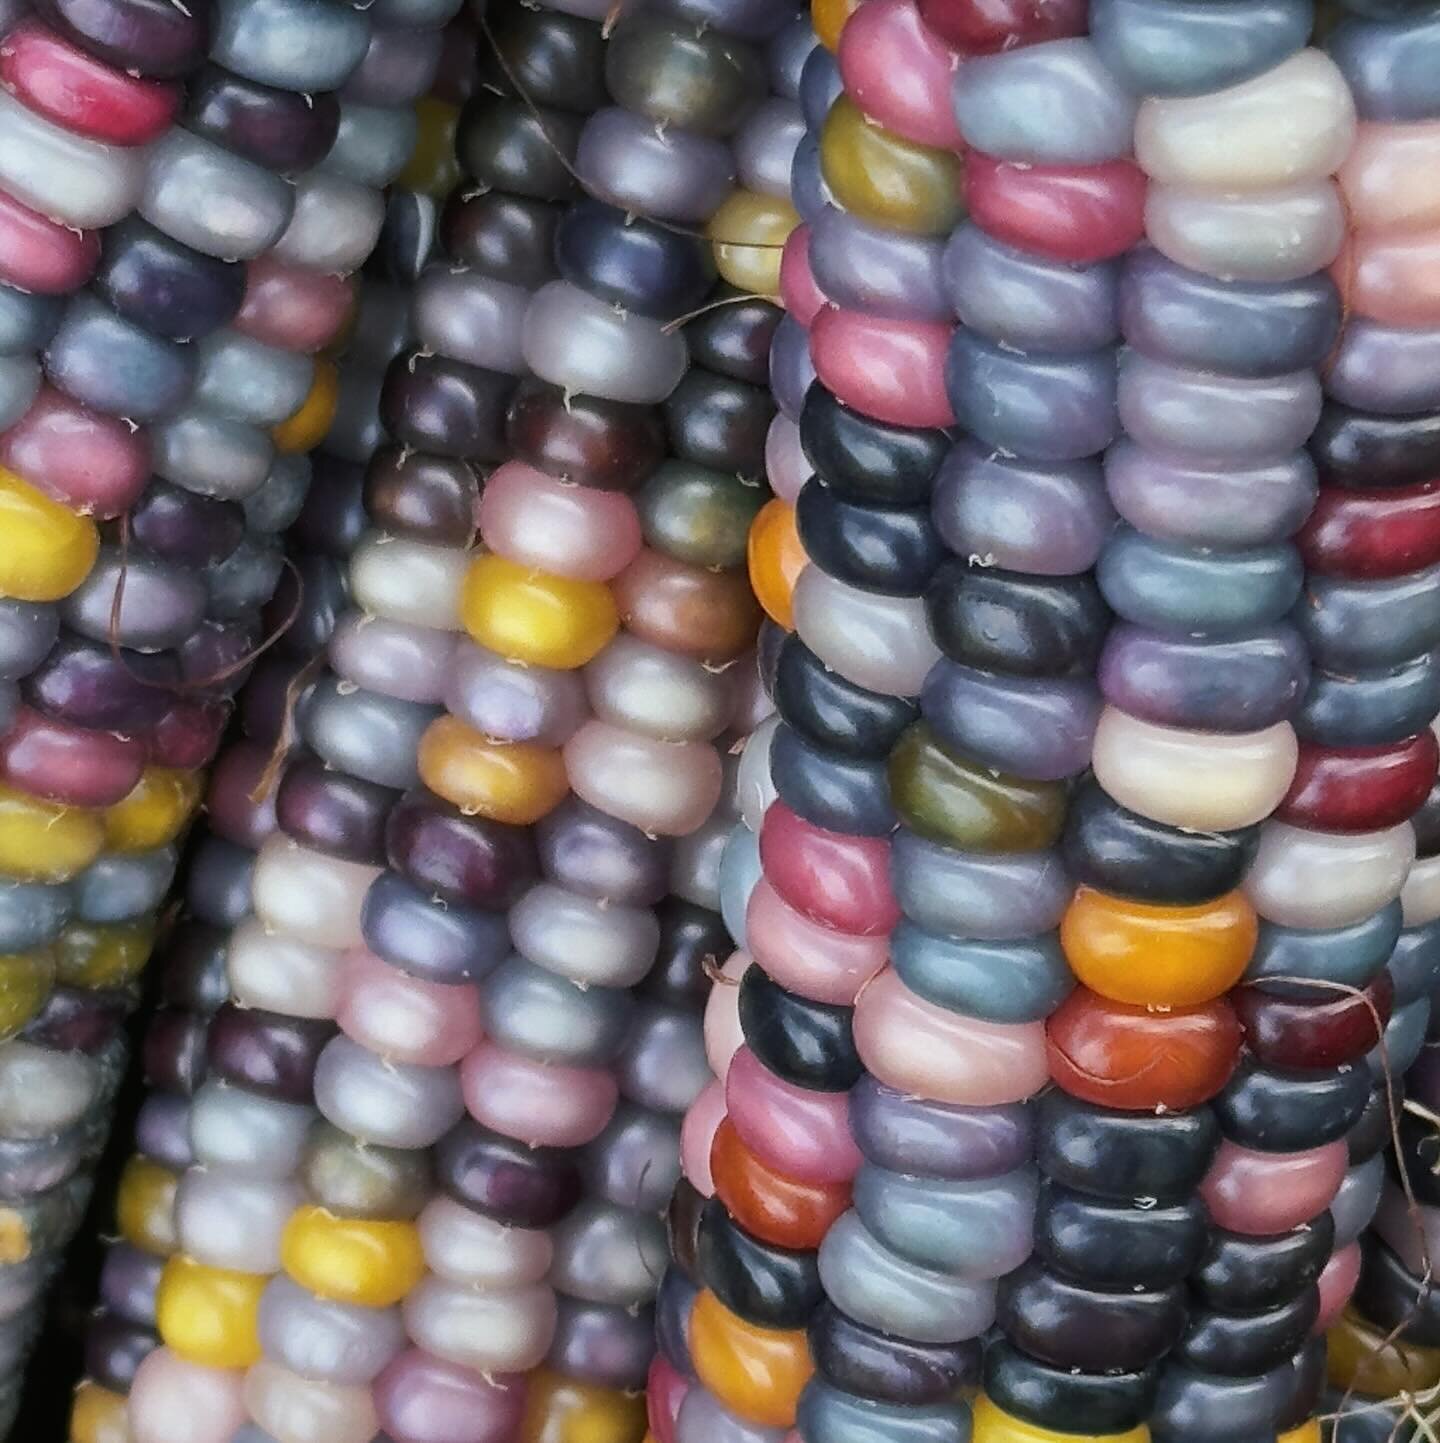 Wait, zoom out&hellip; Can you believe this is corn?👀 Our composted finds just get more interesting by the day!

This variety of corn is called Glass Gem corn, and it has a story.💎🌽✨ Only a few decades ago, half-Cherokee farmer Carl Barnes began p